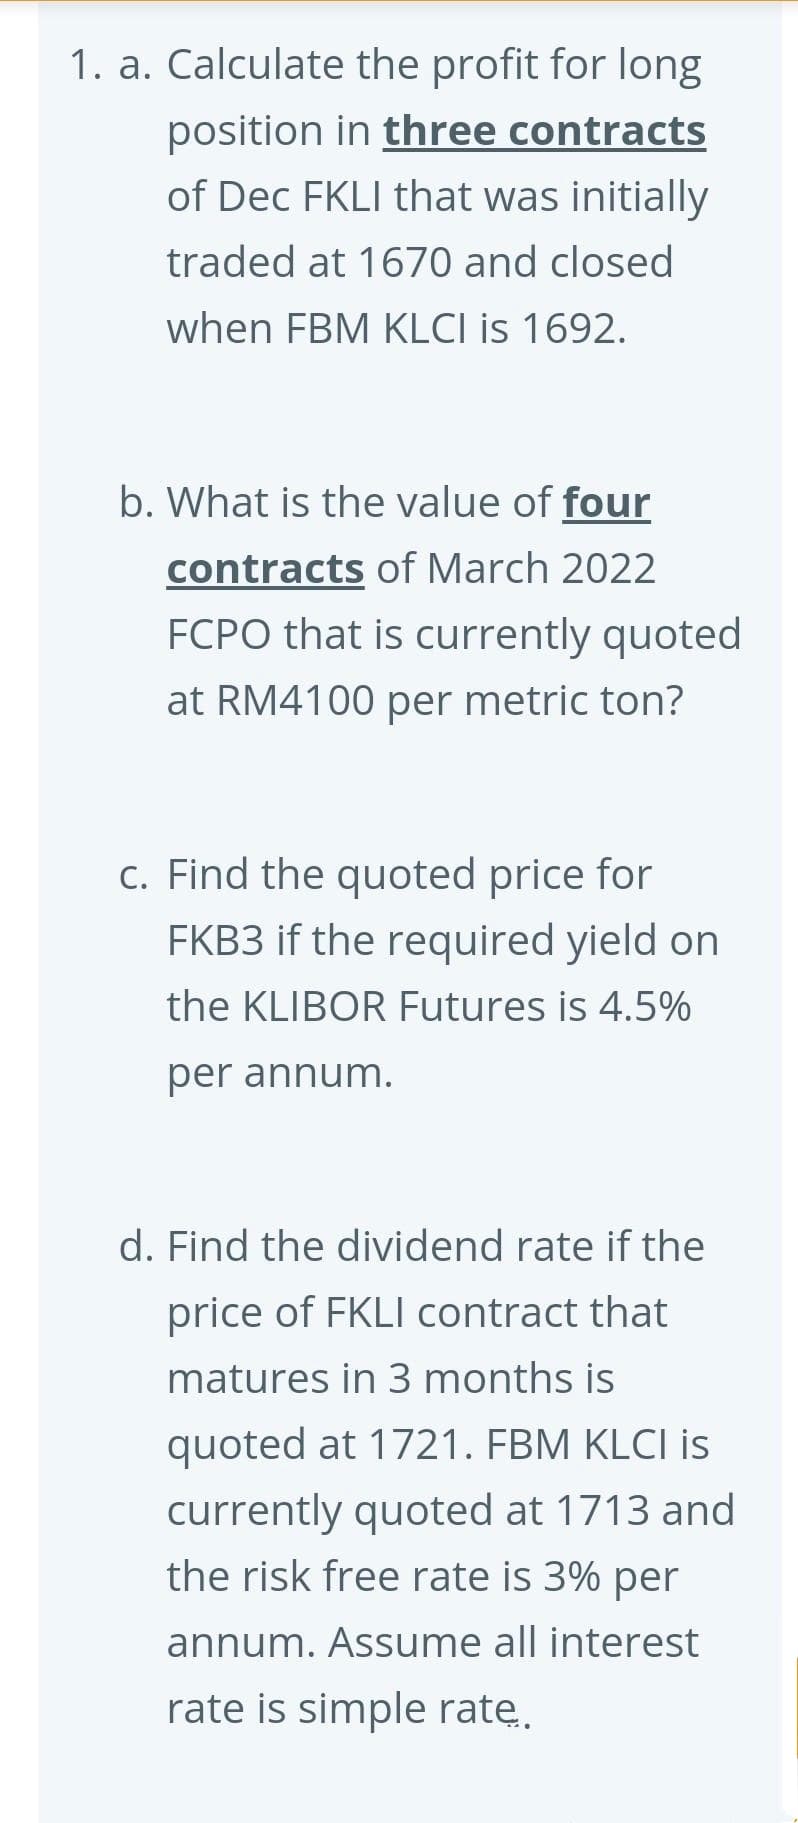 1. a. Calculate the profit for long
position in three contracts
of Dec FKLI that was initially
traded at 1670 and closed
when FBM KLCI is 1692.
b. What is the value of four
contracts of March 2022
FCPO that is currently quoted
at RM4100 per metric ton?
c. Find the quoted price for
FKB3 if the required yield on
the KLIBOR Futures is 4.5%
per annum.
d. Find the dividend rate if the
price of FKLI contract that
matures in 3 months is
quoted at 1721. FBM KLCI is
currently quoted at 1713 and
the risk free rate is 3% per
annum. Assume all interest
rate is simple ratę.
